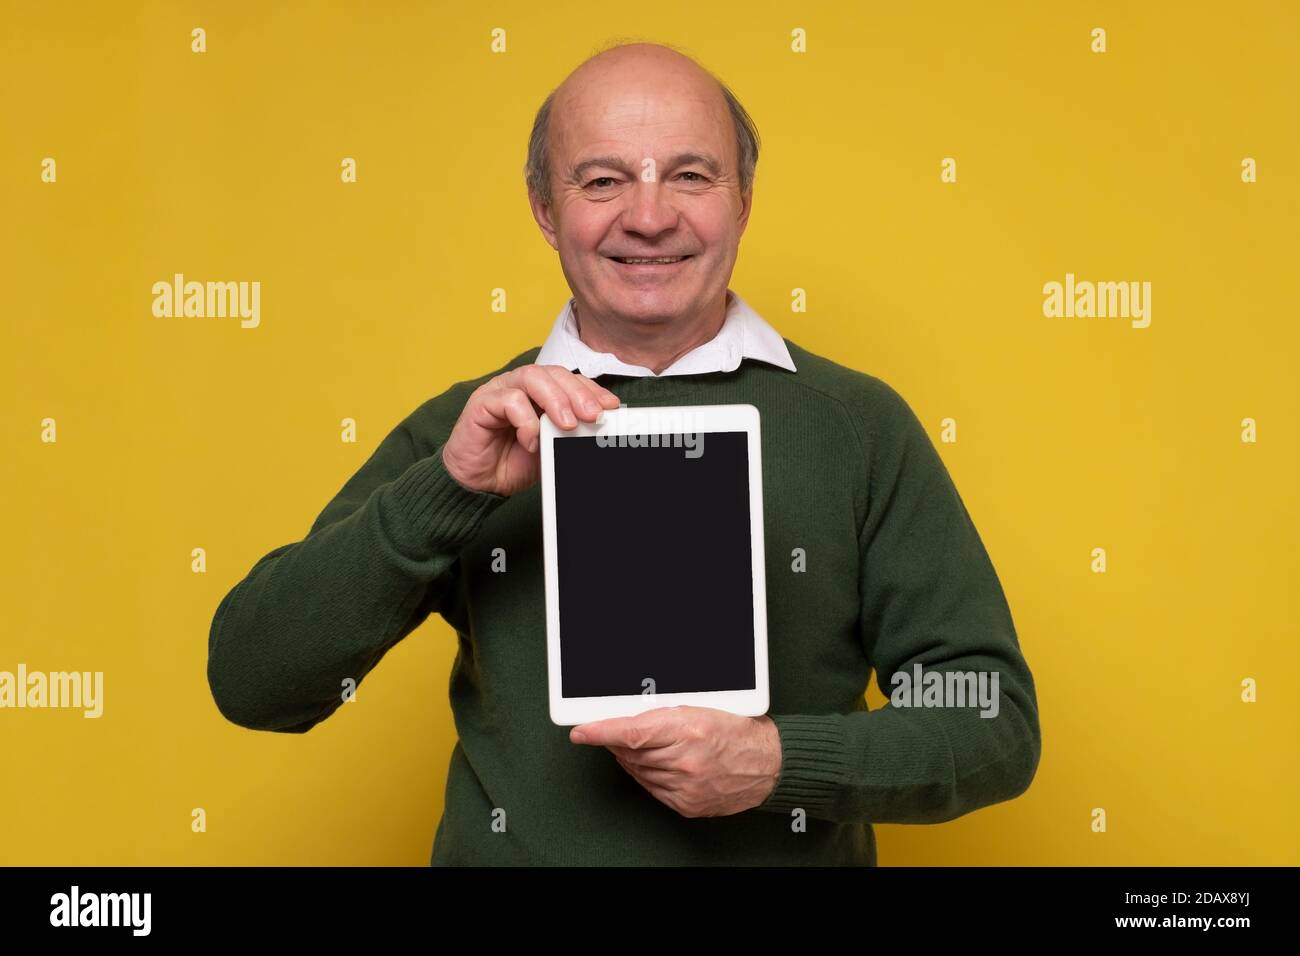 Senior aged middle aged man holding tablet with blank screen Stock Photo